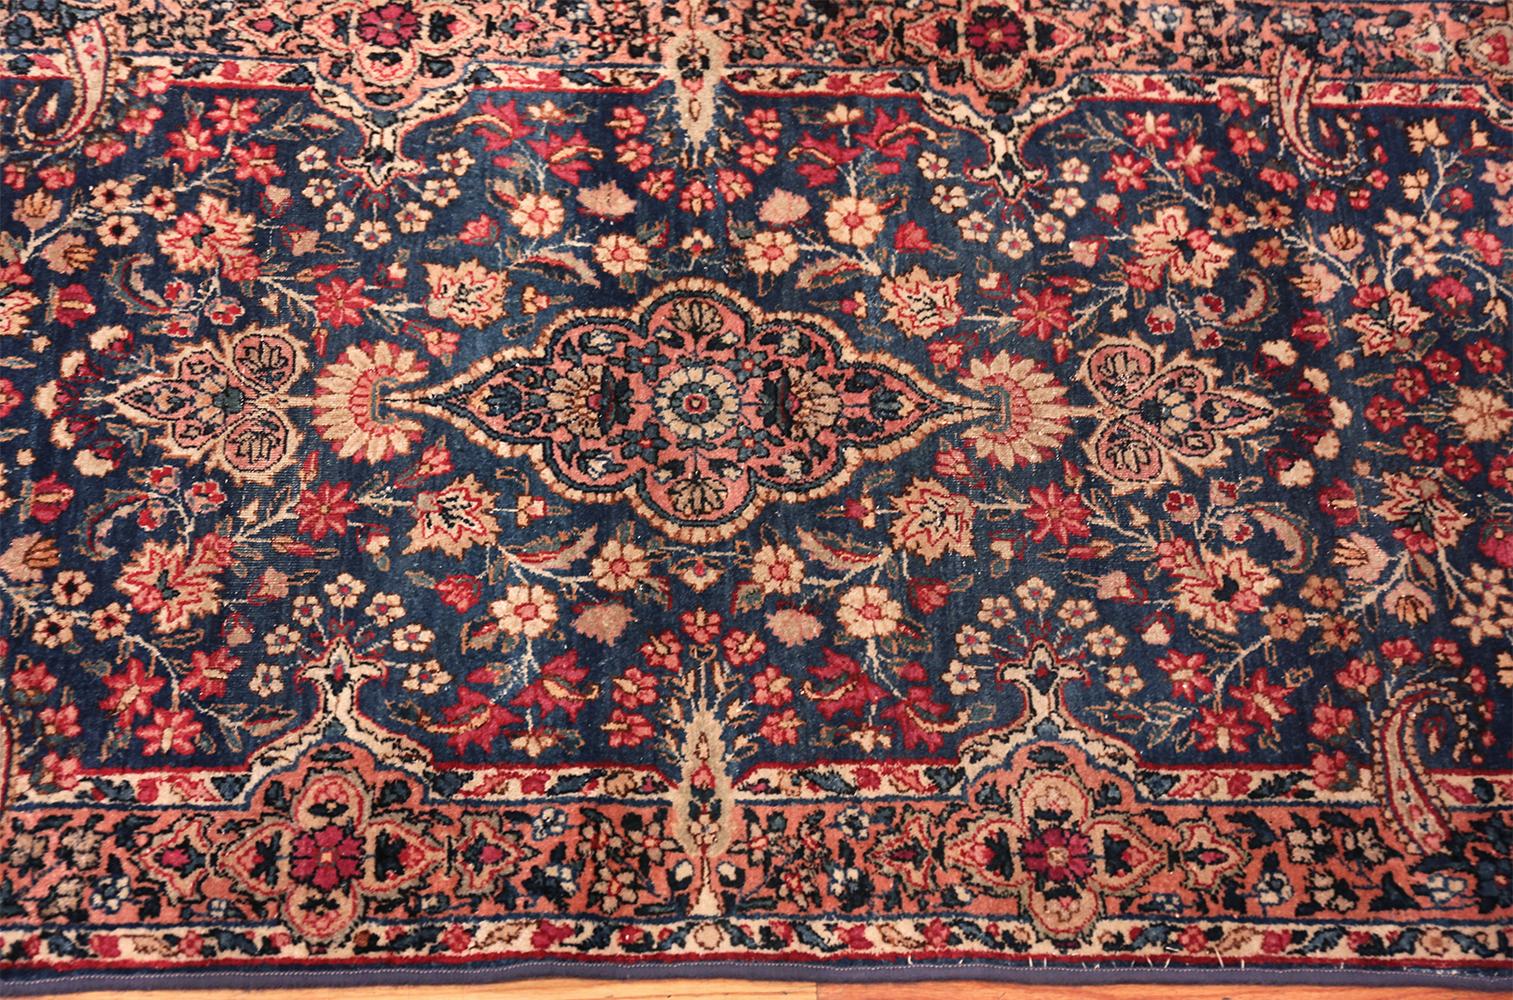 A stunning floral design antique Persian Kerman runner rug, country of origin: Persia, date: circa 1920 - Size: 2 ft 6 in x 25 ft 6 in (0.76 m x 7.77 m). This breathtaking rug from Kerman is an exceptionally rare find for several reasons. Kerman has